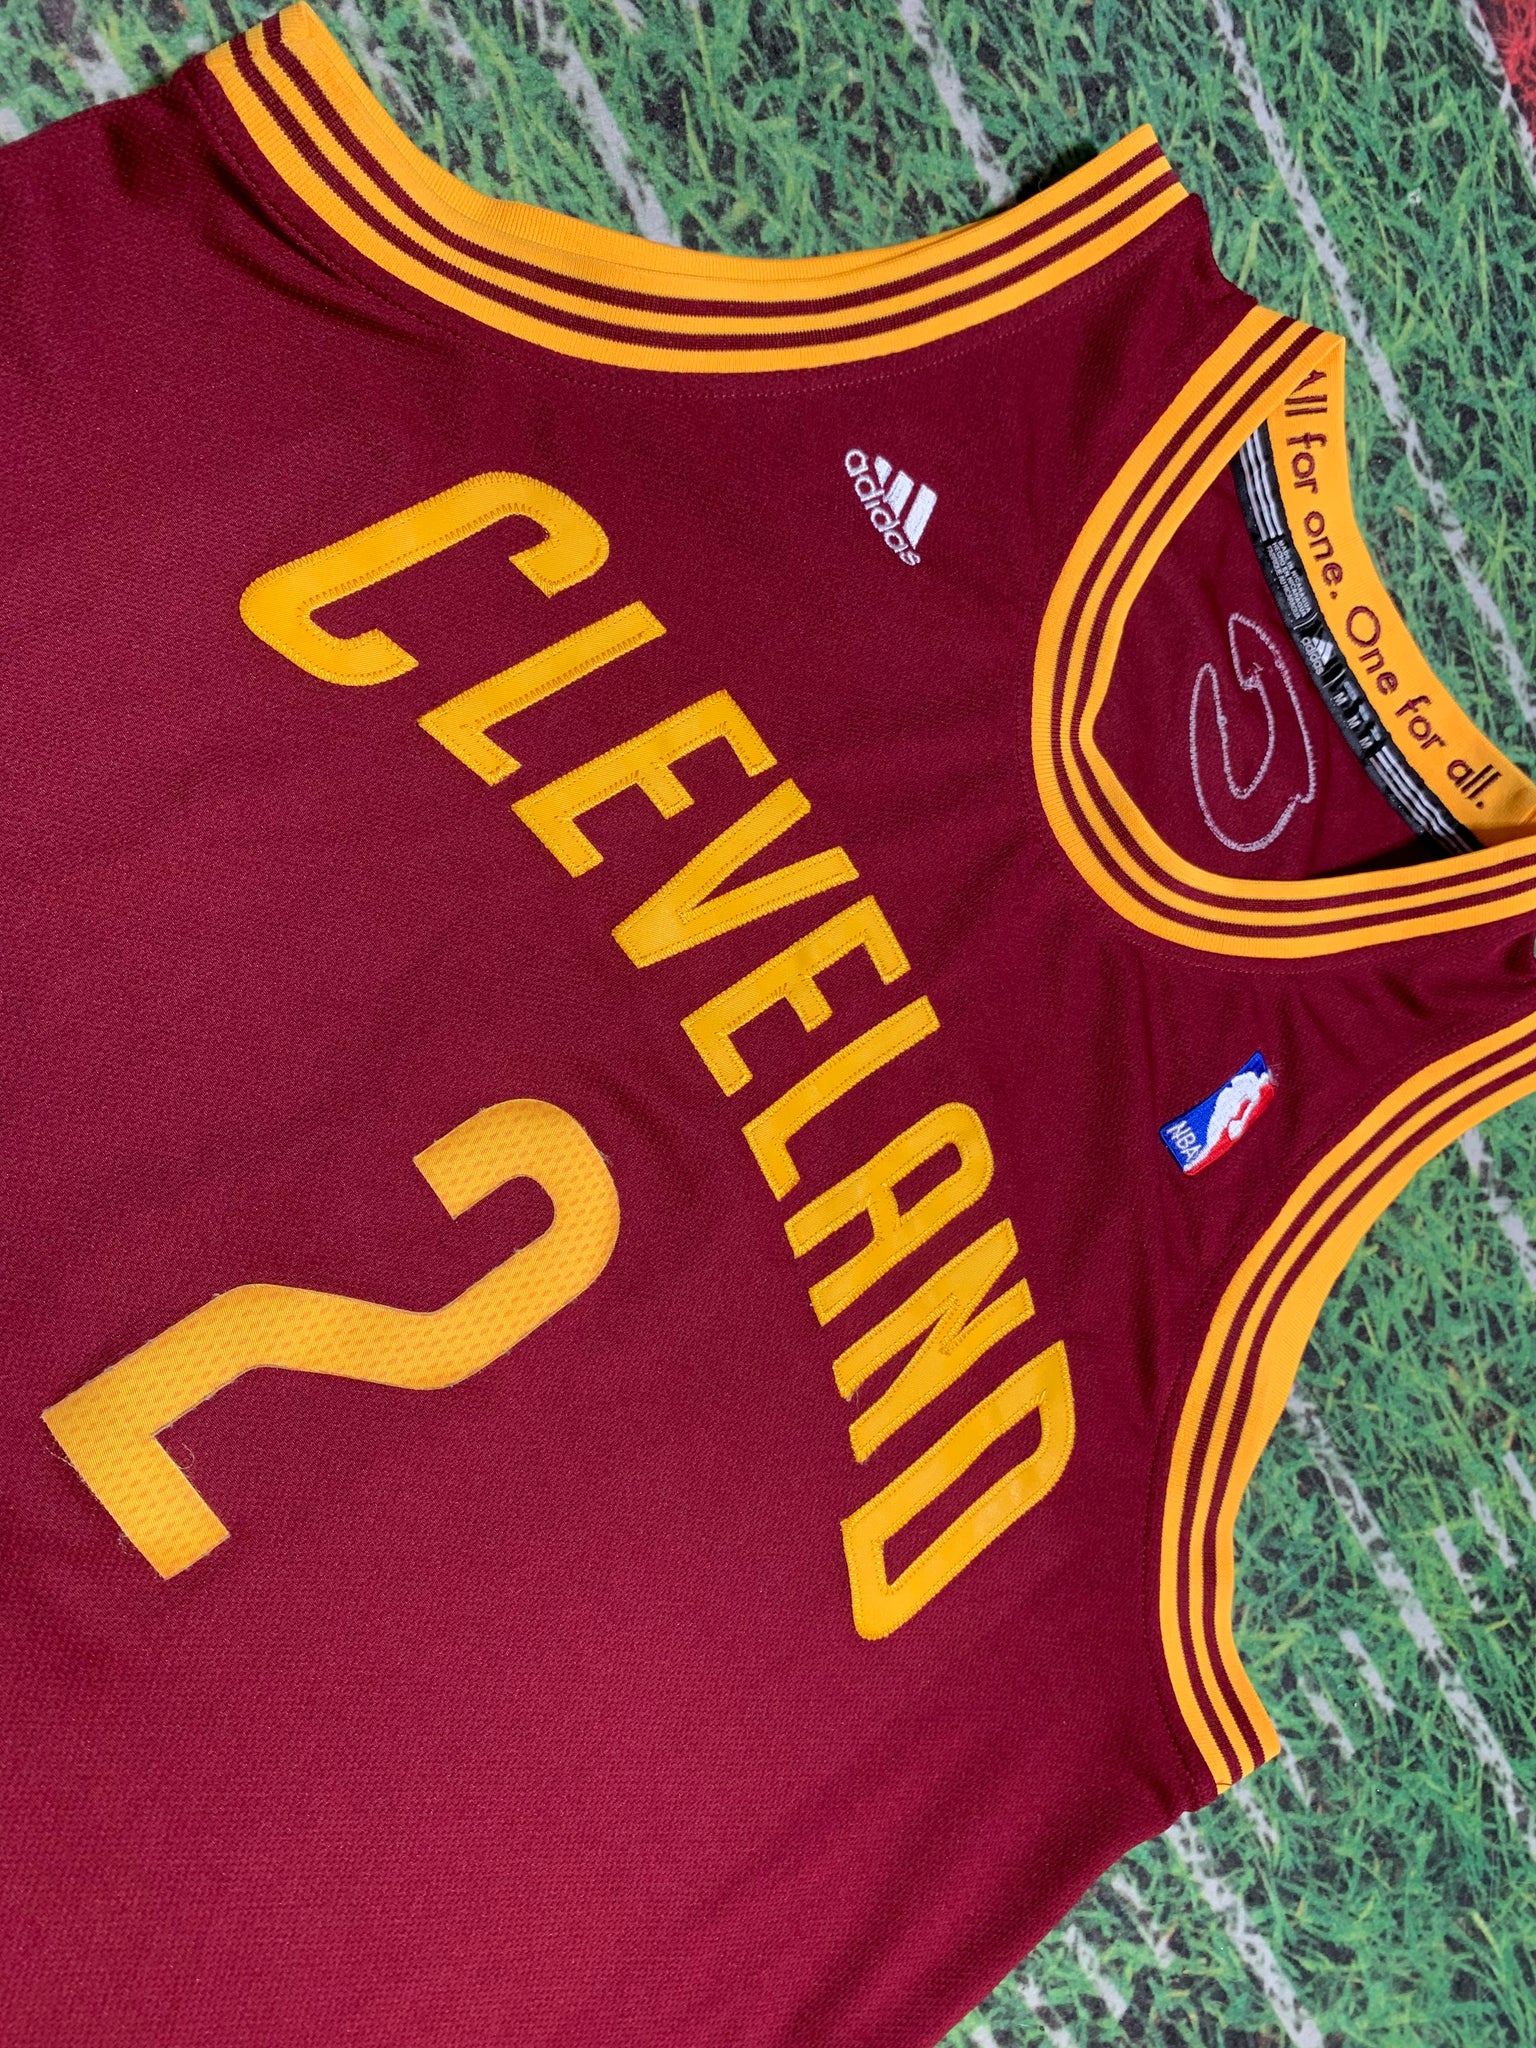 NBA JERSEY CLEVELAND CAVALIERS Kyrie Irving Adidas SZ M VTG Uncle